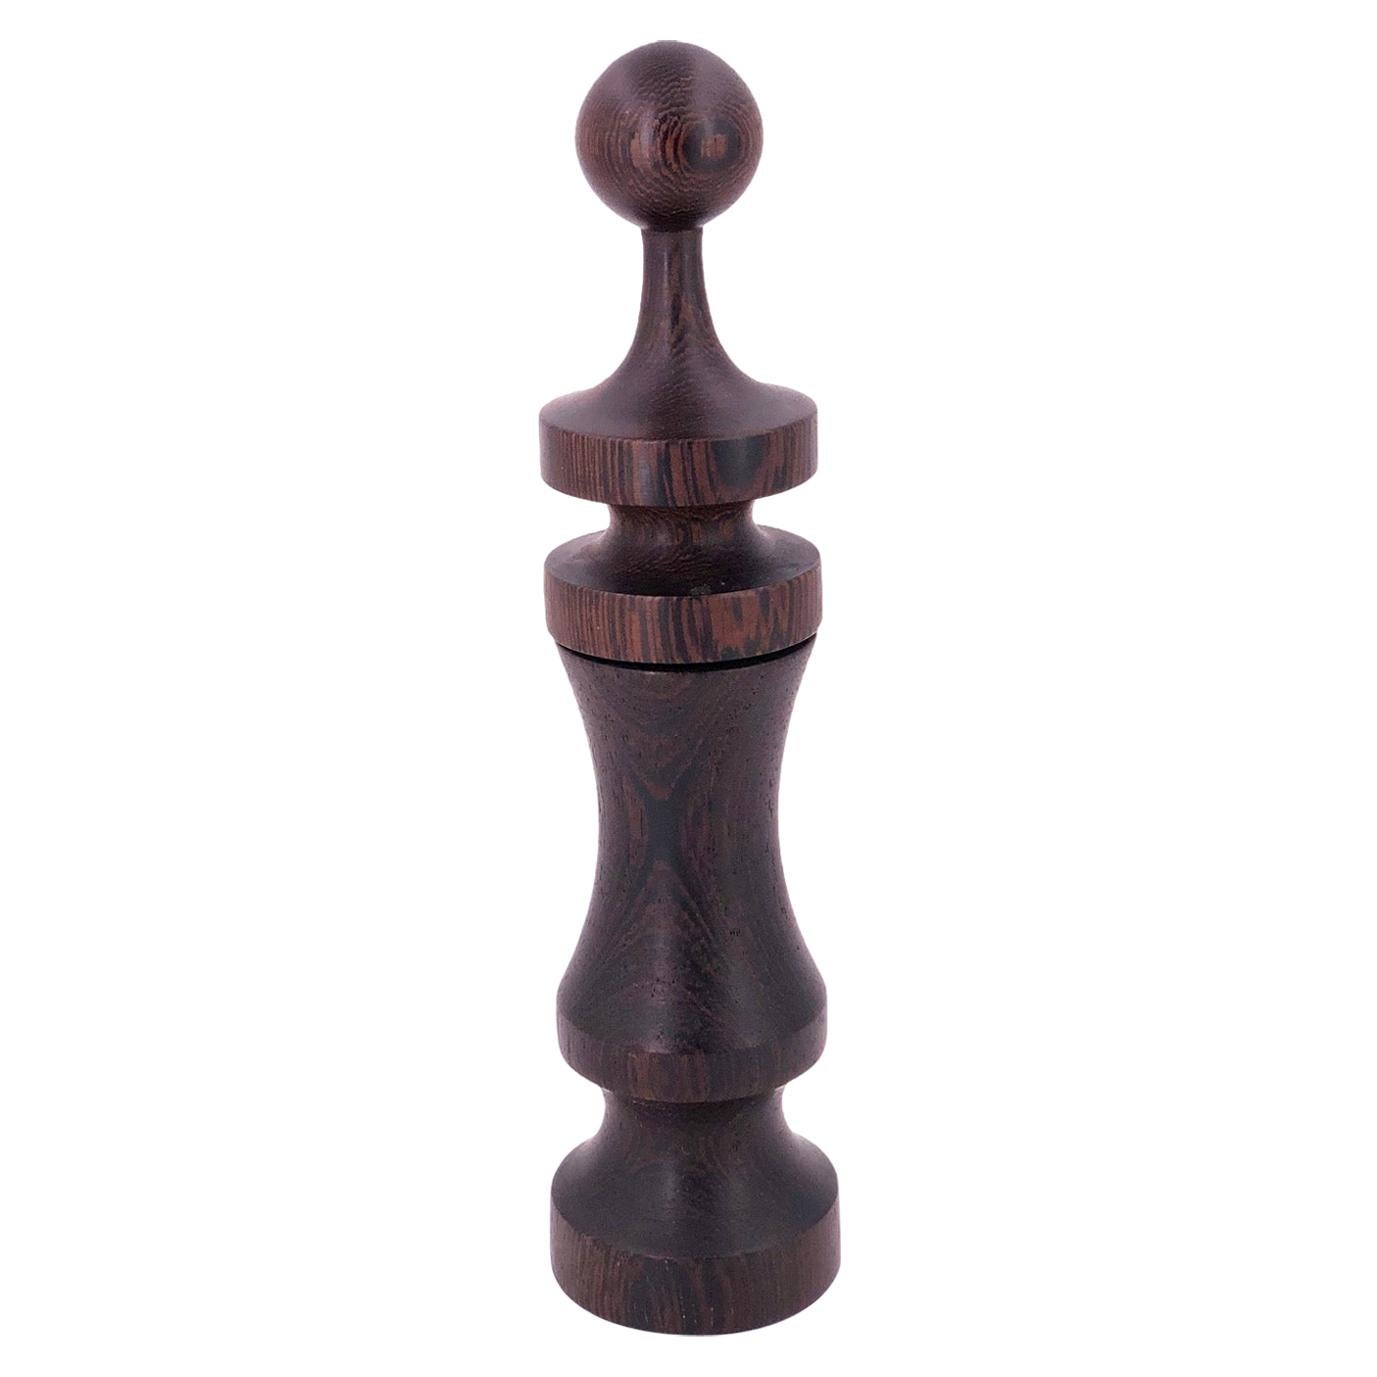 Danish Modern Rare Pepper Grinder in Wenge Wood by Laurids Longborg For Sale